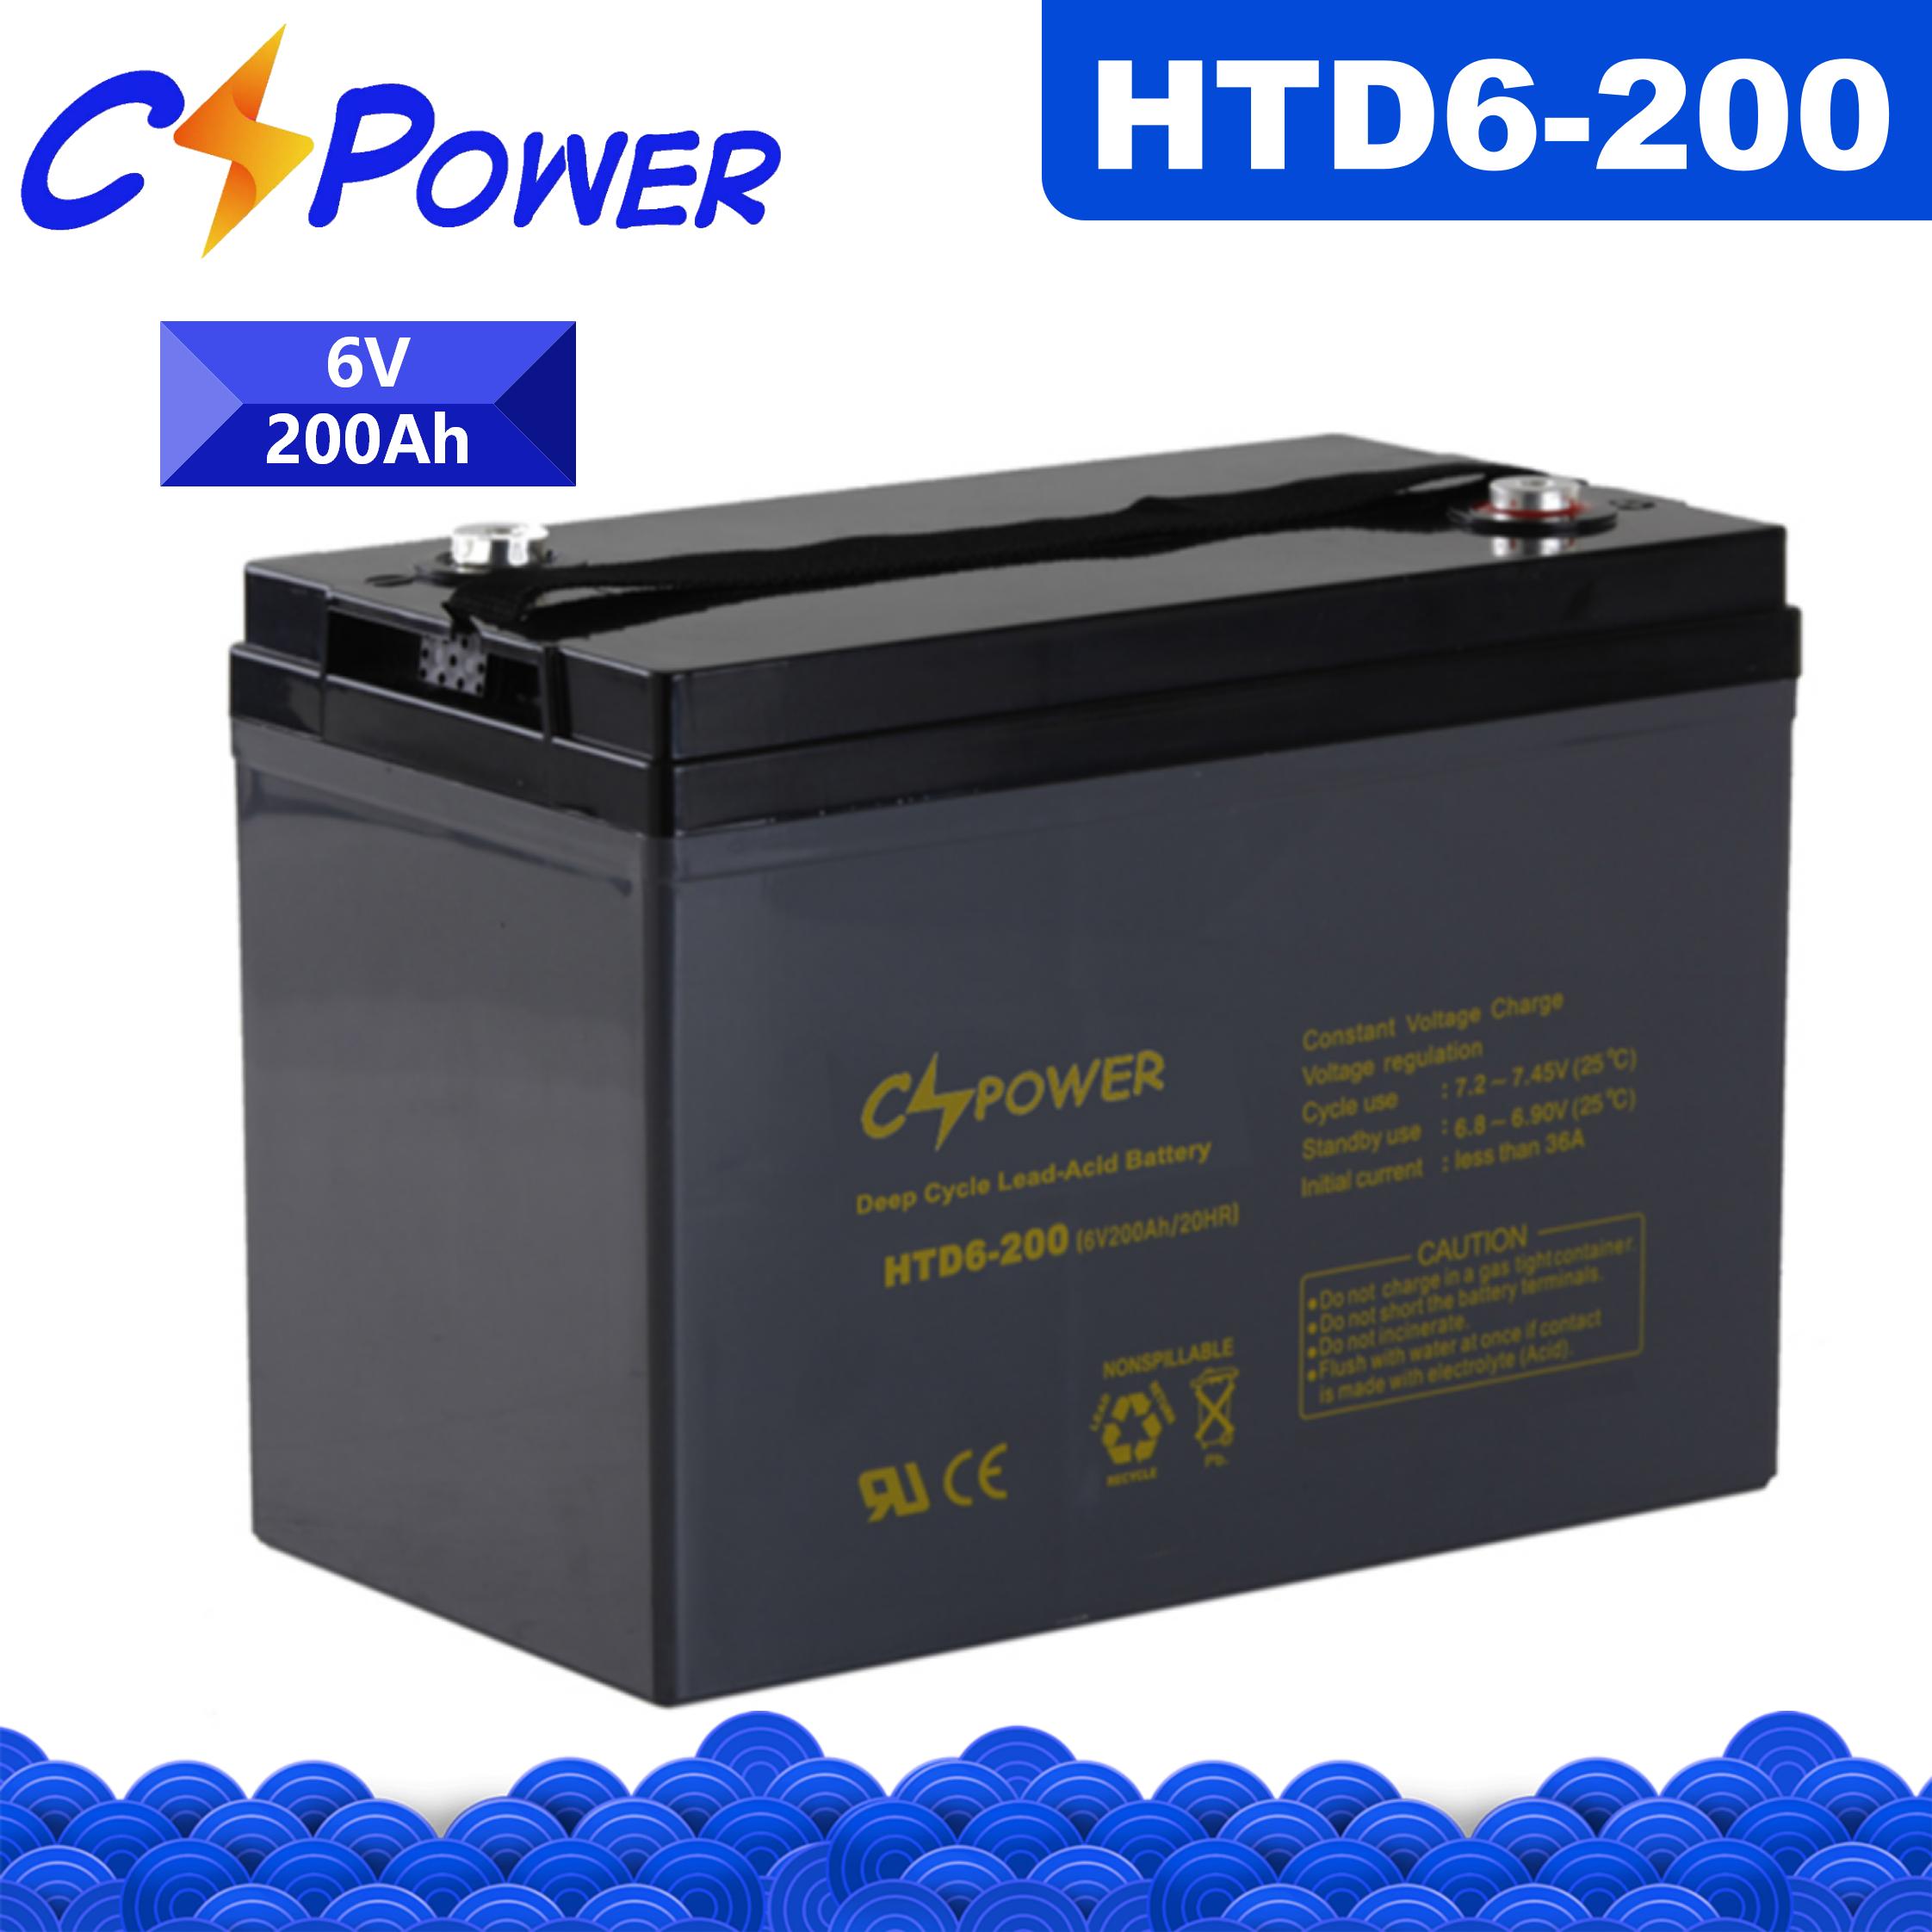 CSPower HTD6-200 Deep Cycle VRLA AGM Battery